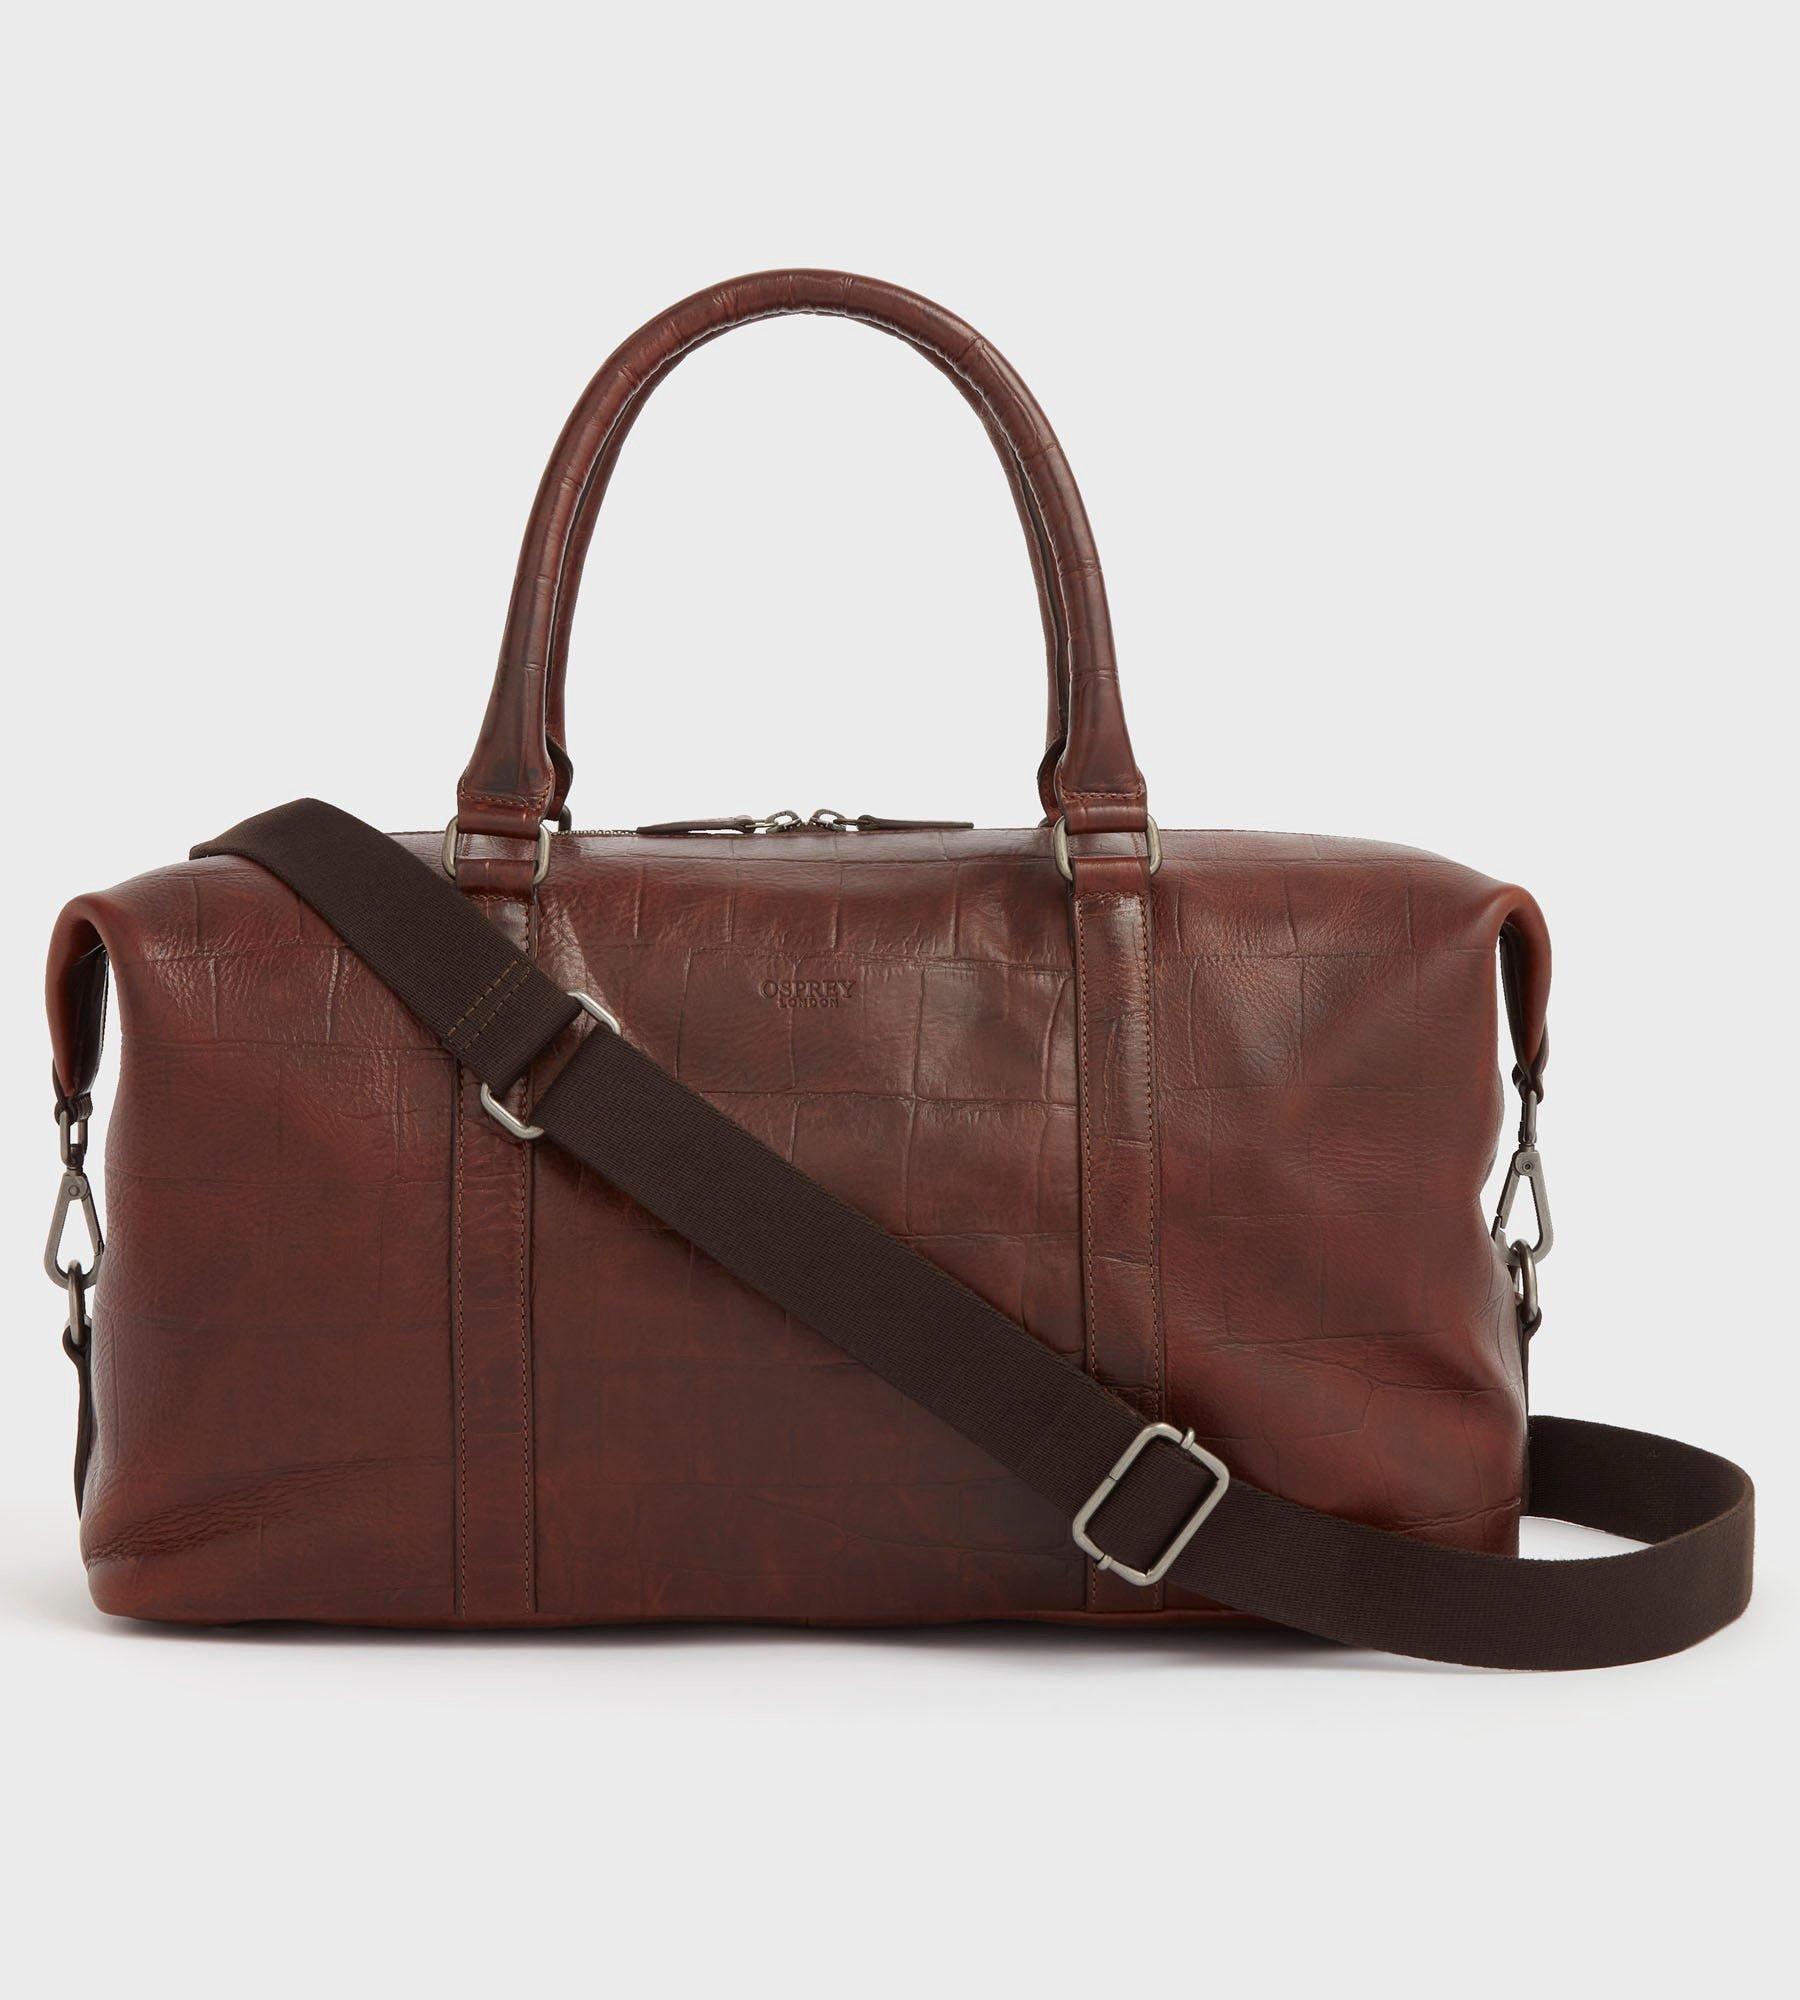 The Brixton Leather Weekender Bag